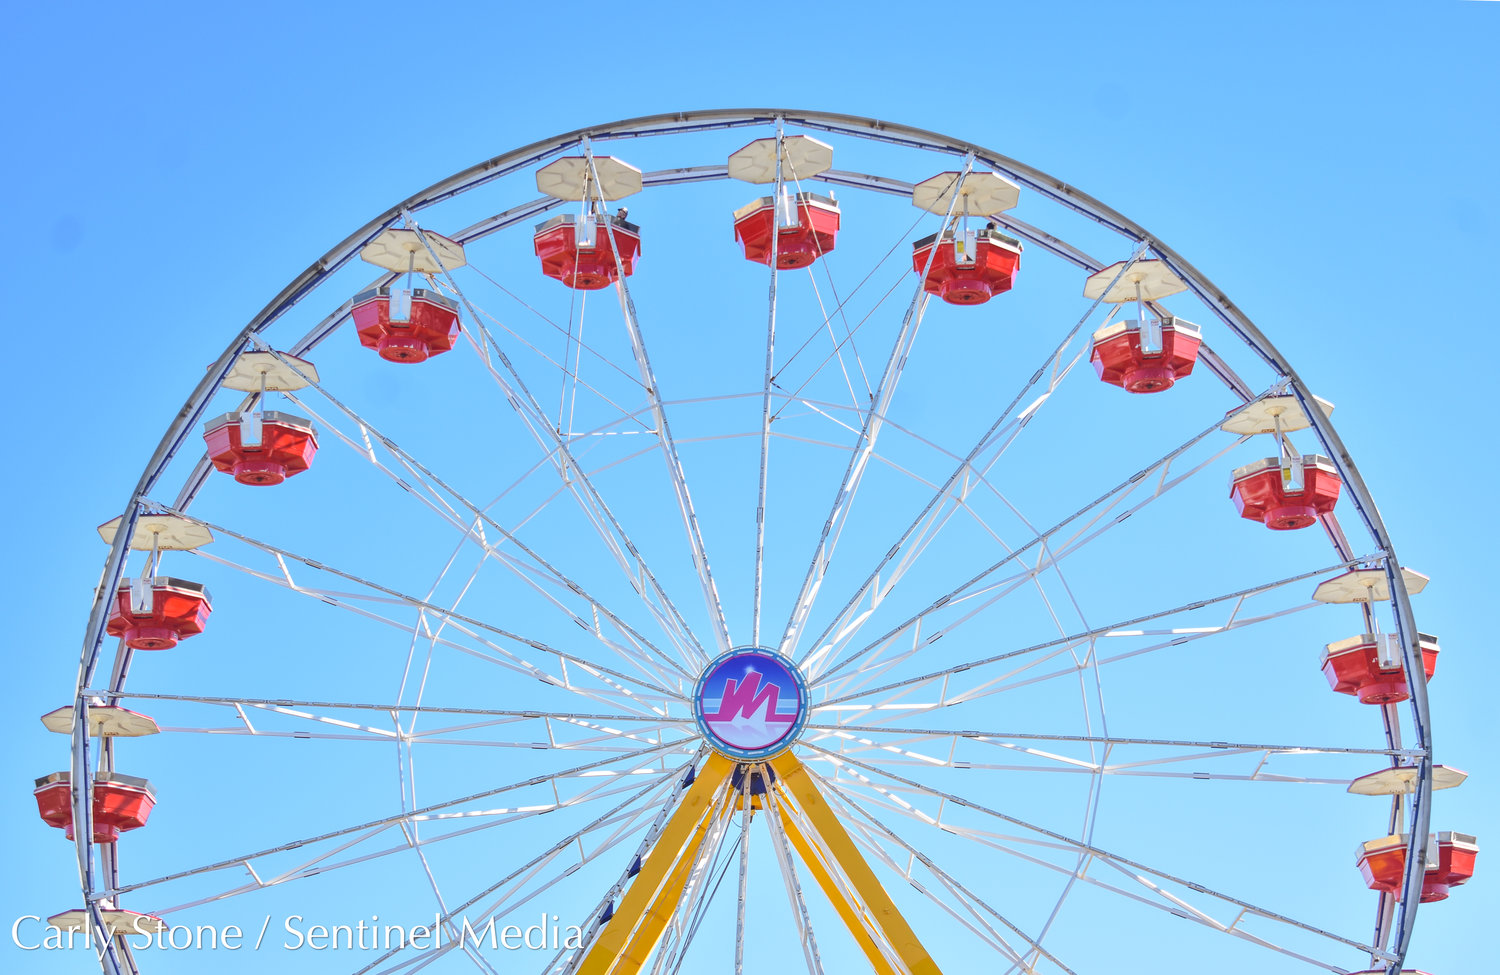 Get a bird's-eye view of the state fairgrounds by going around the ferris wheel.